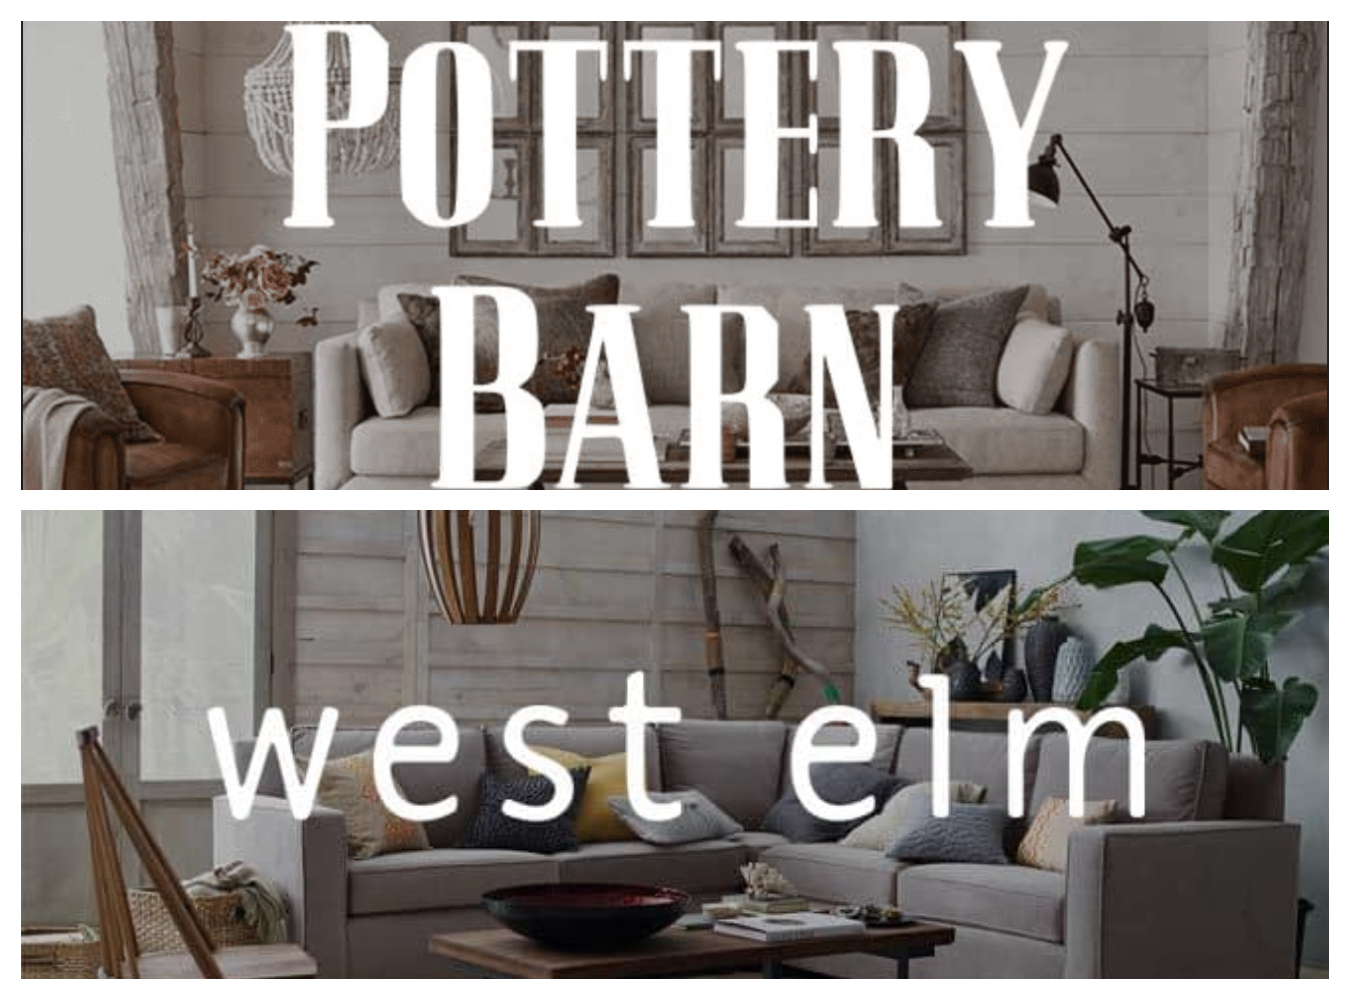 What Are Differences Between West Elm Vs Pottery Barn Furniture?